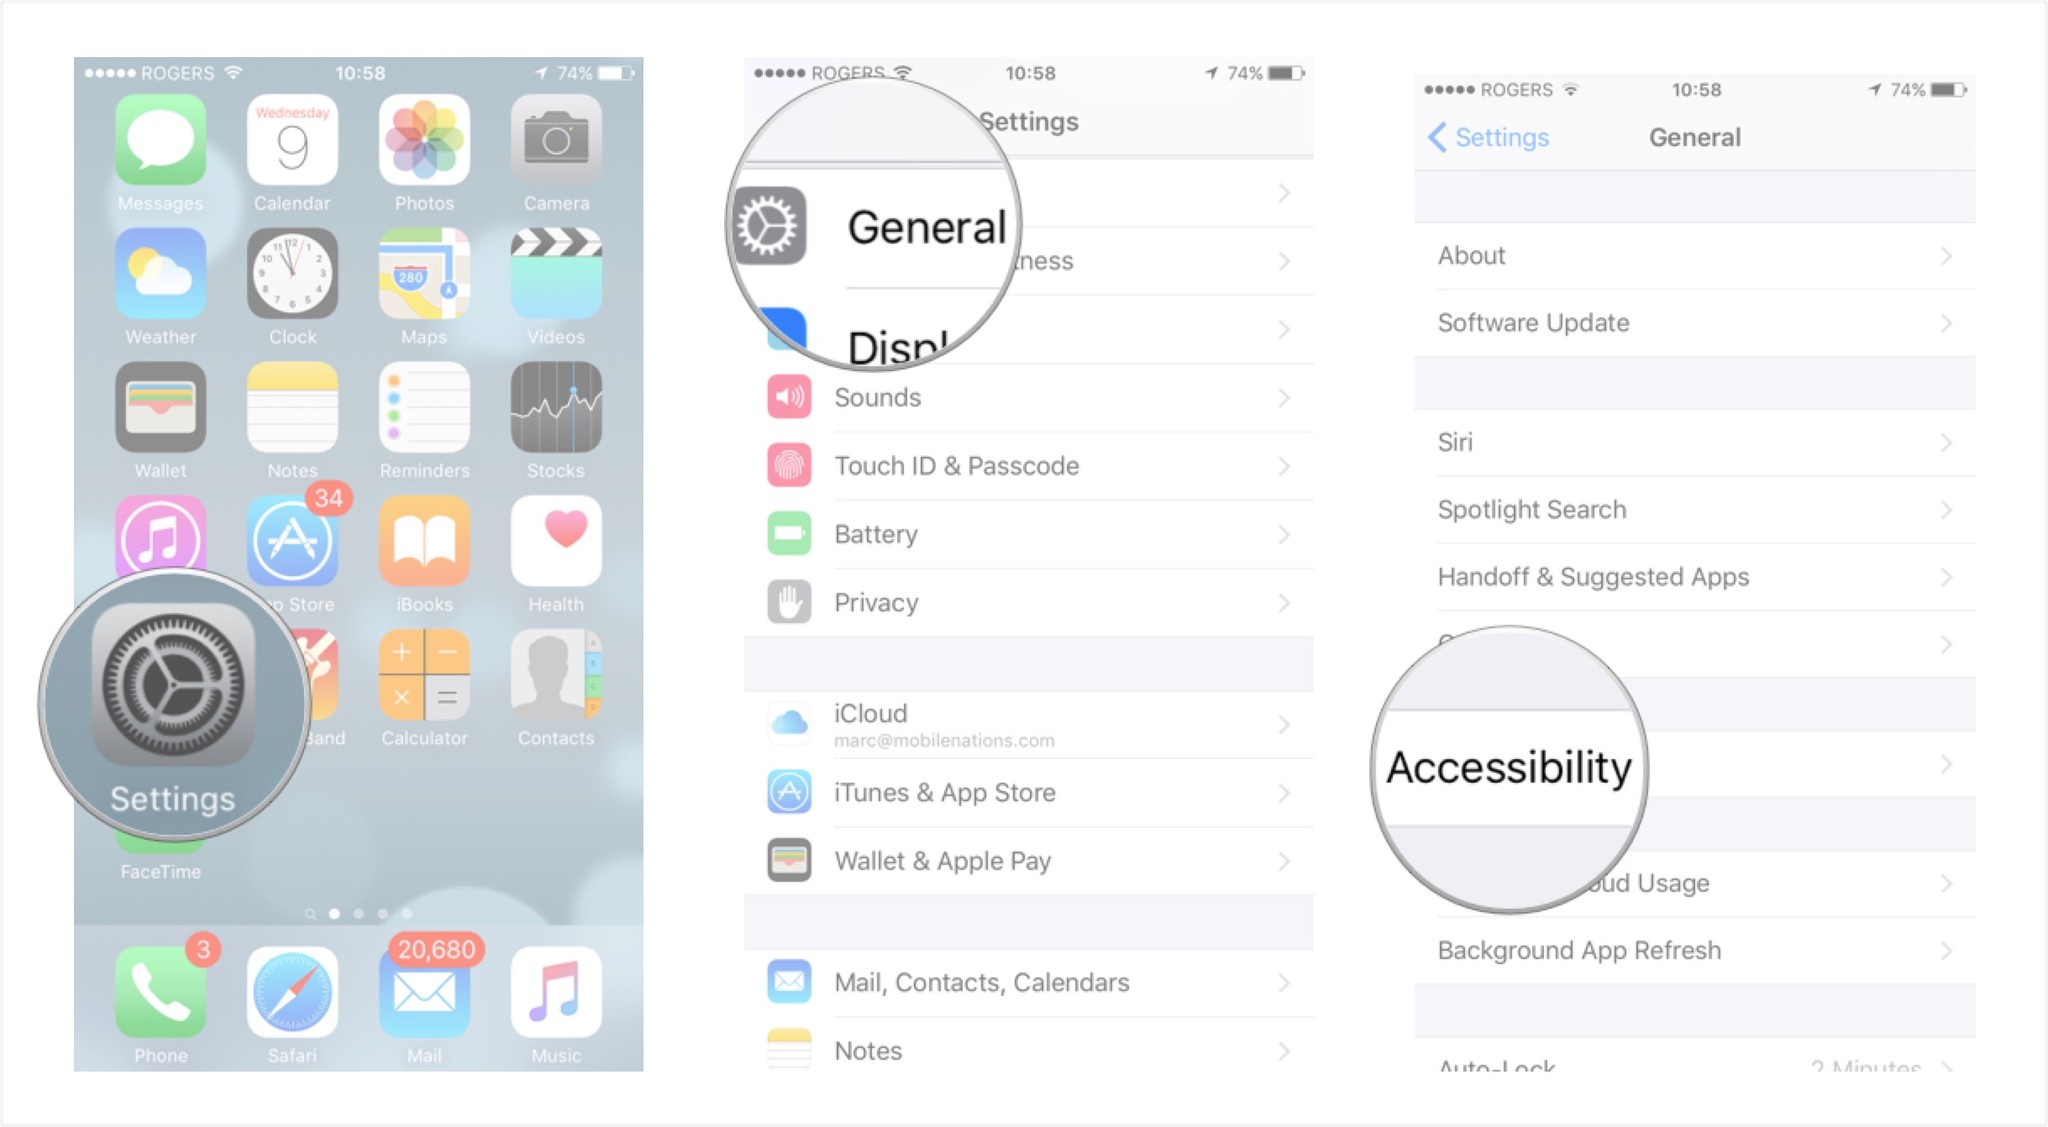 Launch the Settings app tap on General and tap on Accessibility.